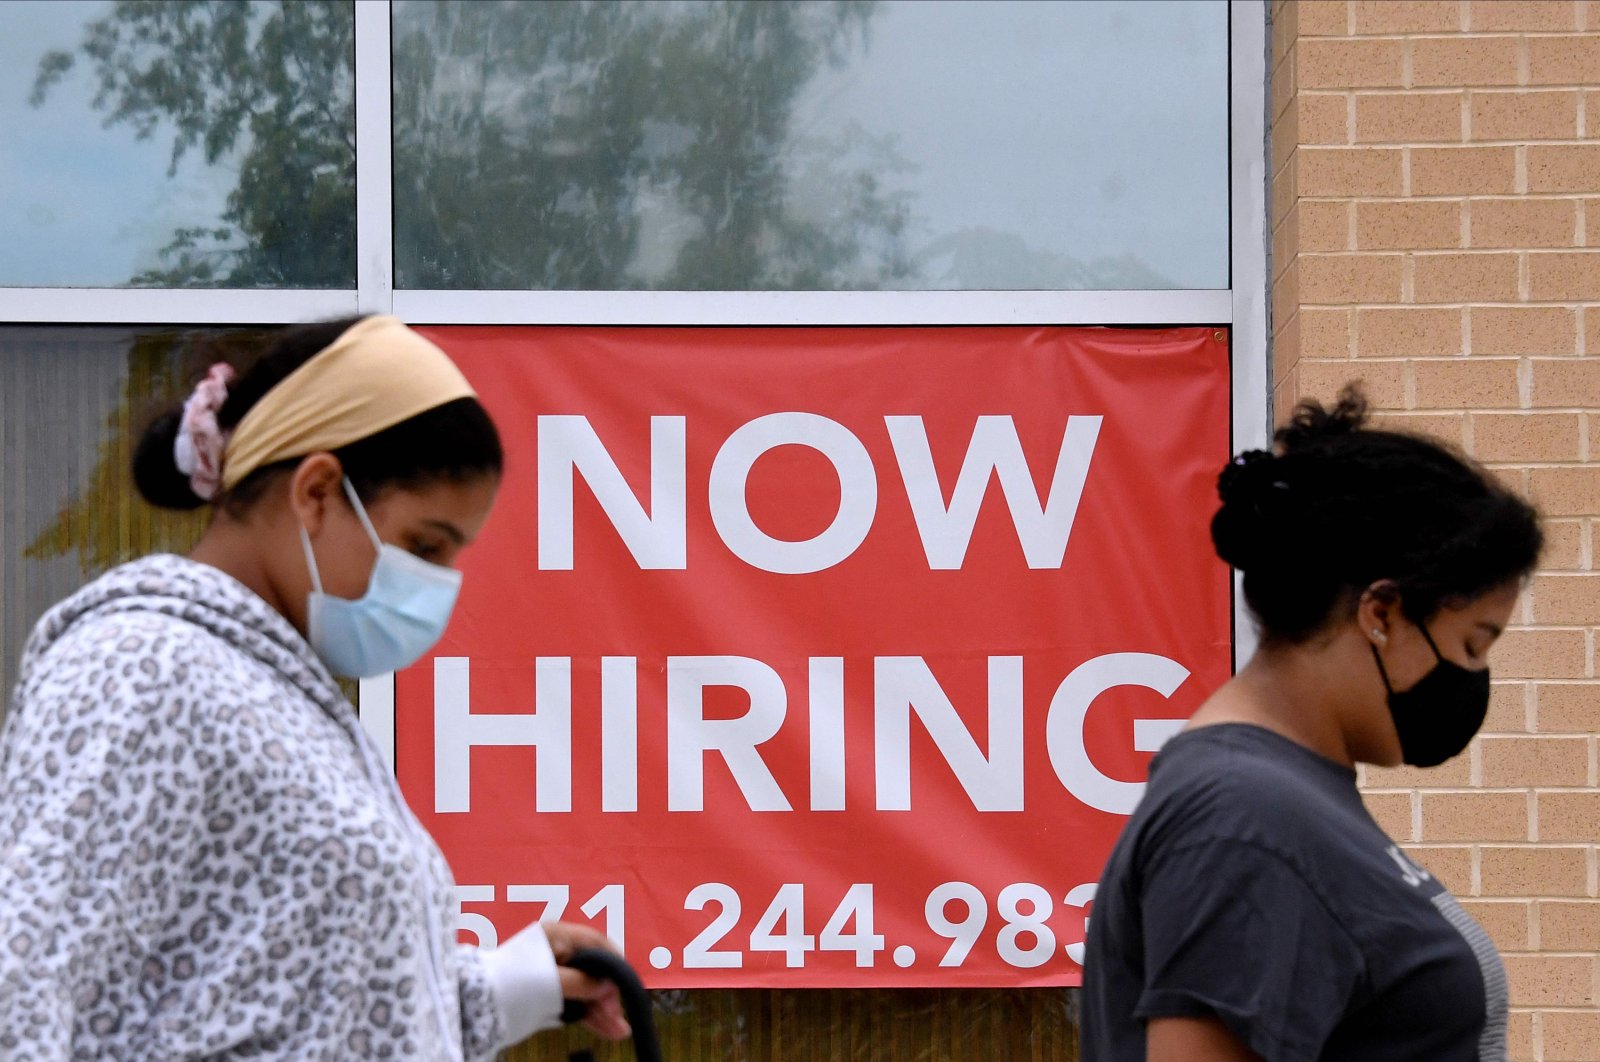 Women walk past by a "Now Hiring" sign outside a store in Arlington, Virginia, U.S., Aug. 16, 2021. (AFP Photo)